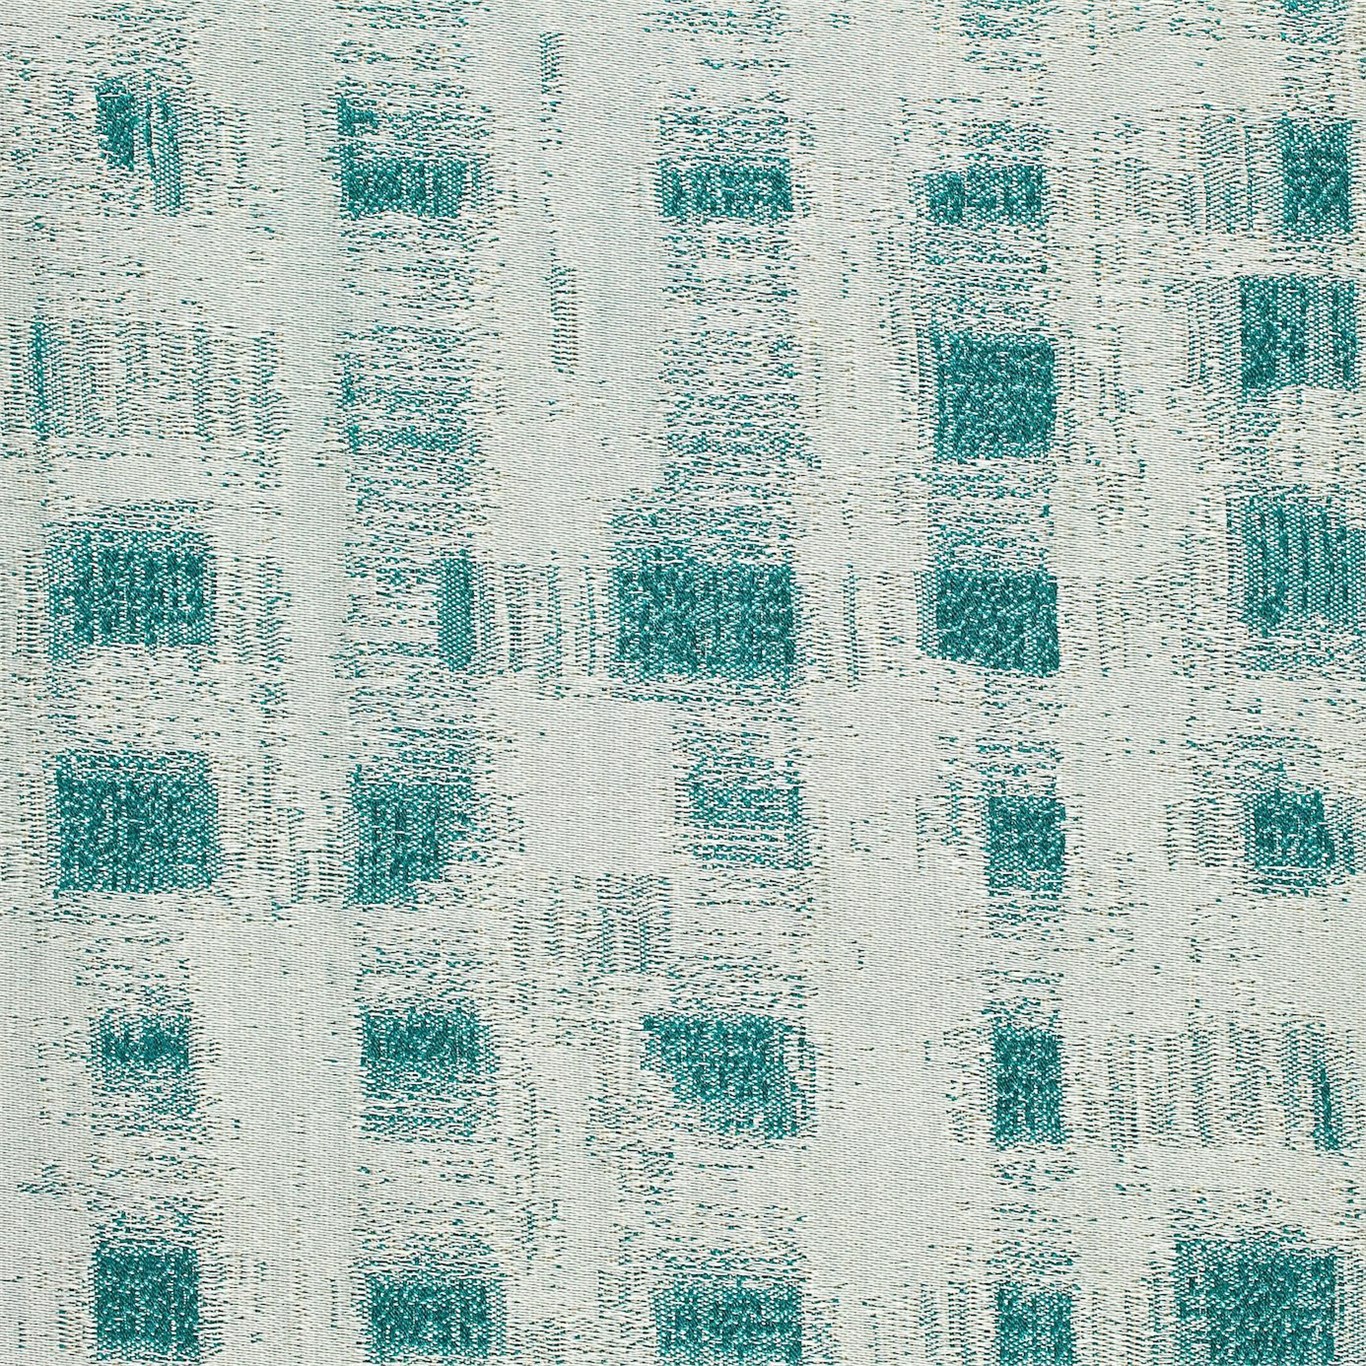 Sancerre Turquoise Fabric by HAR